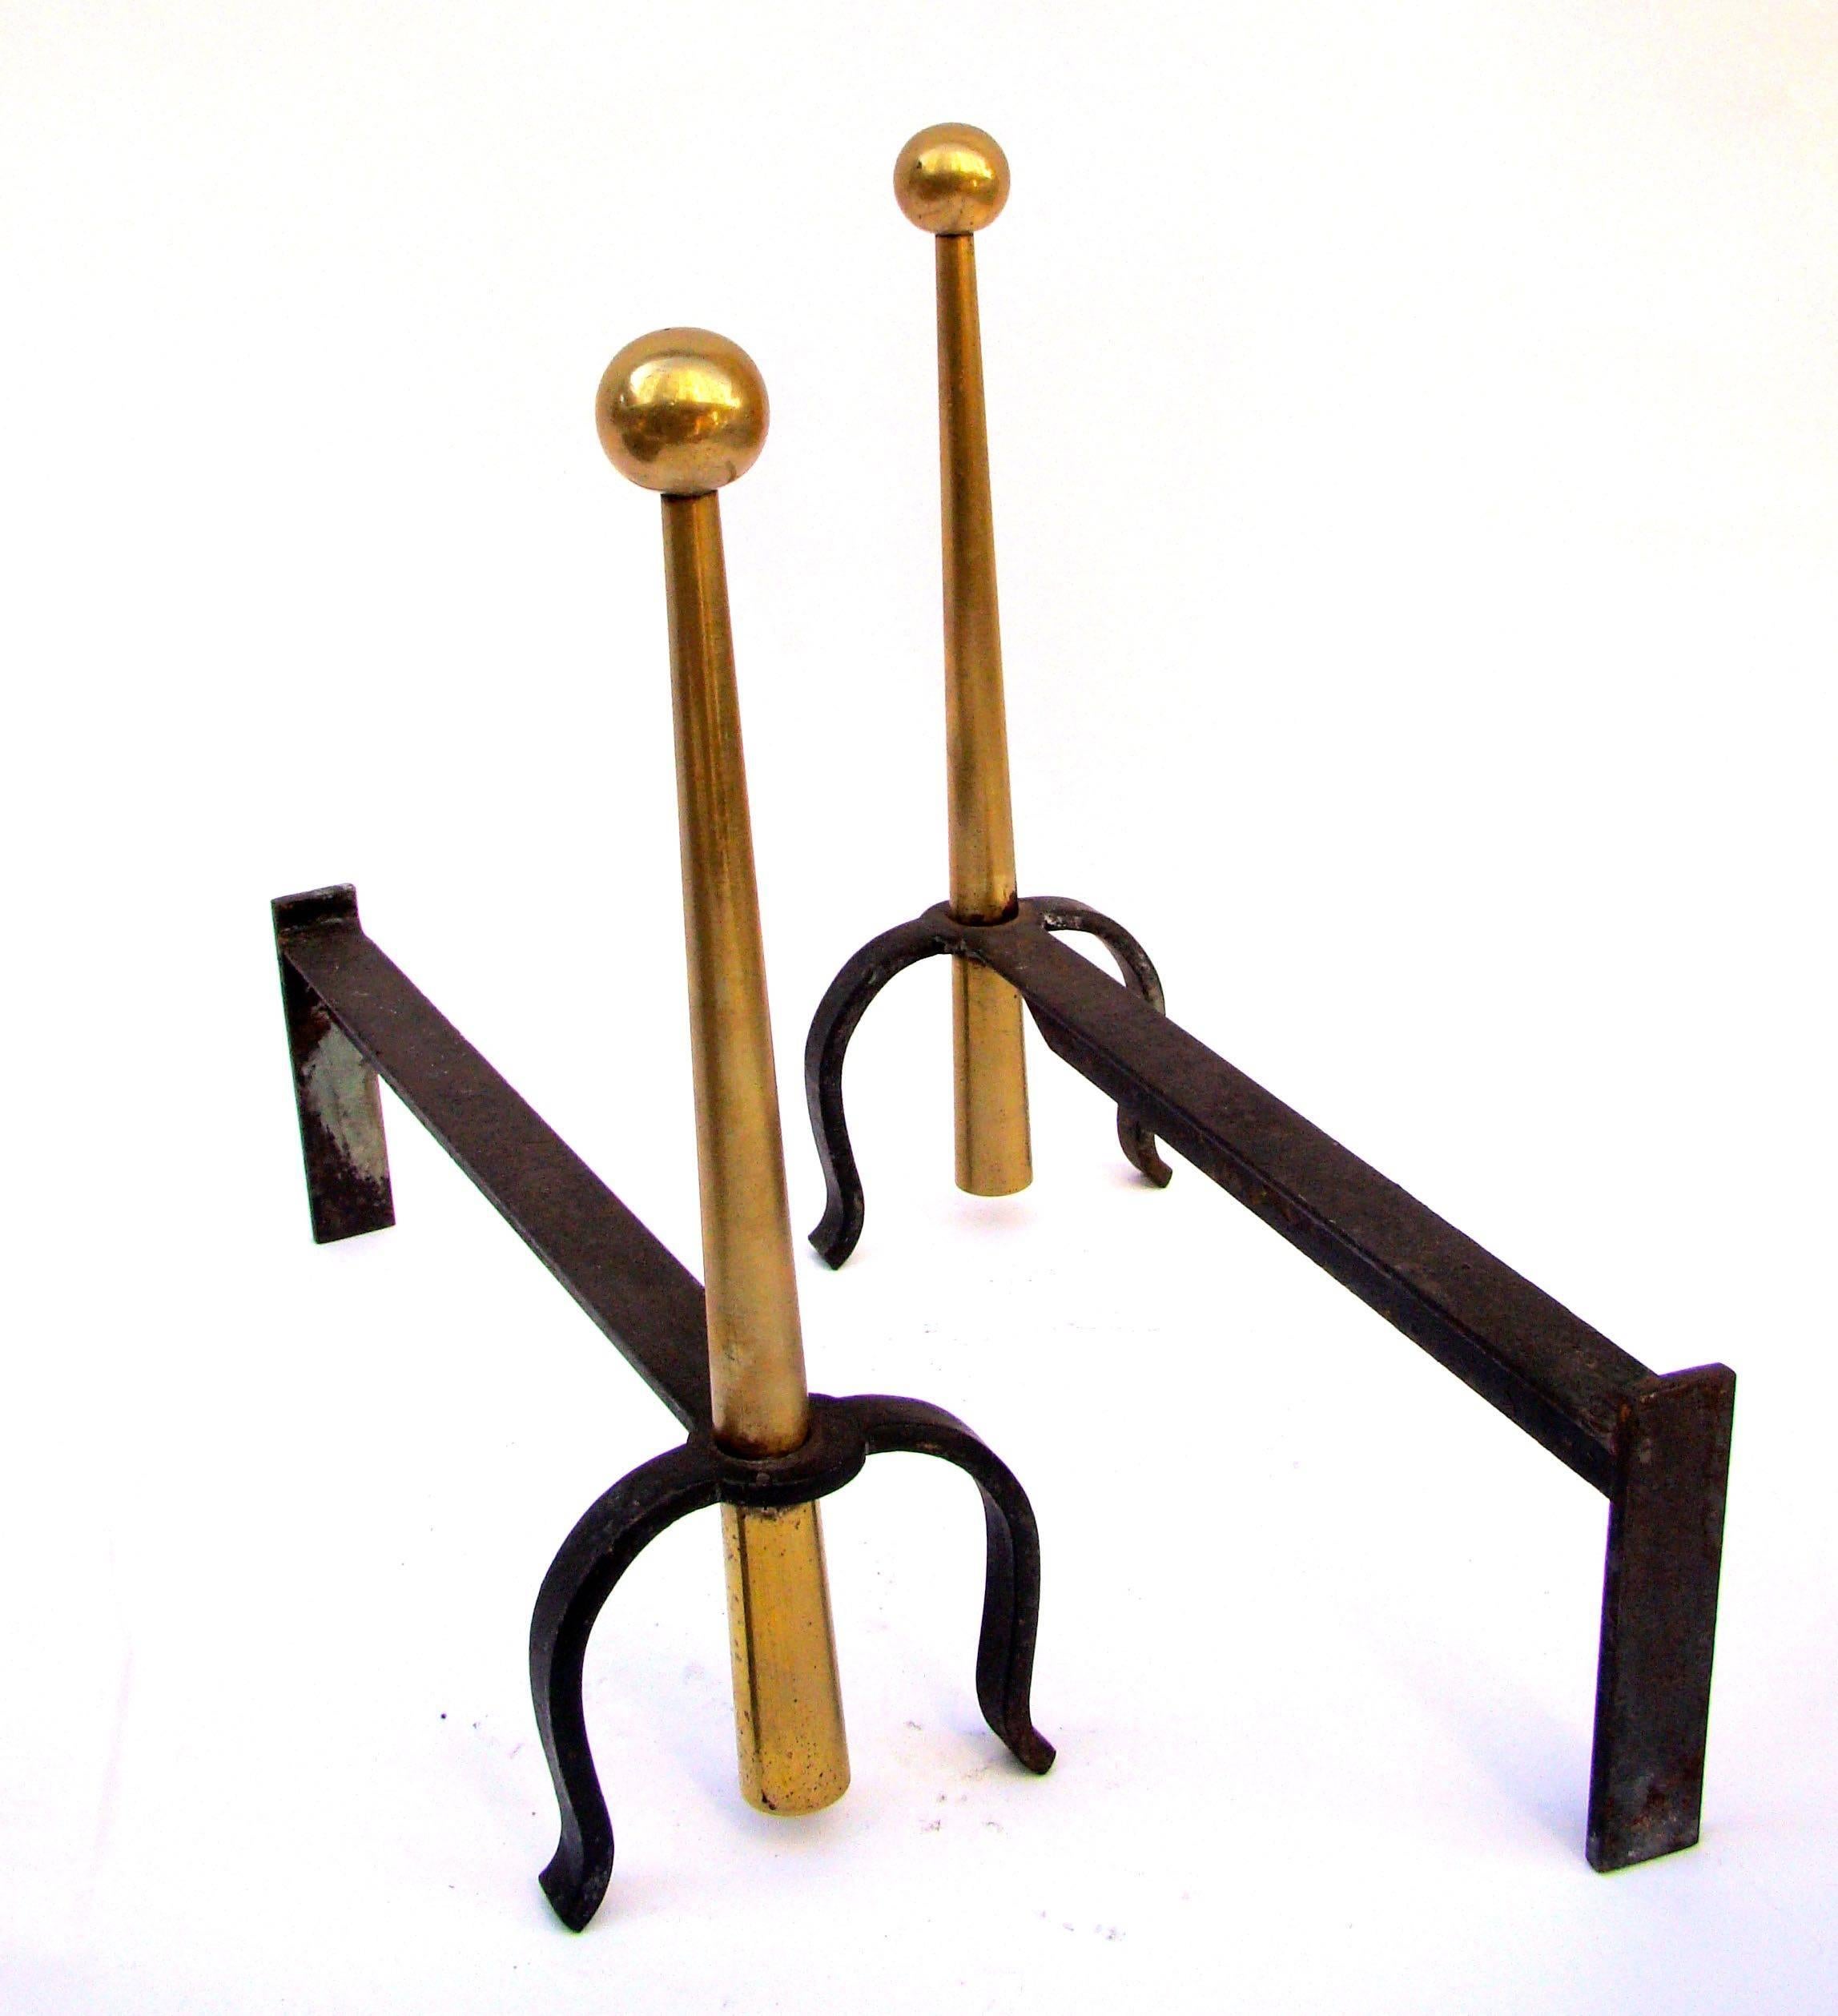 Pair of andirons in the style of Jean Royère in wrought iron and brass surmounted by large spheres, circa 1950s-1960s.